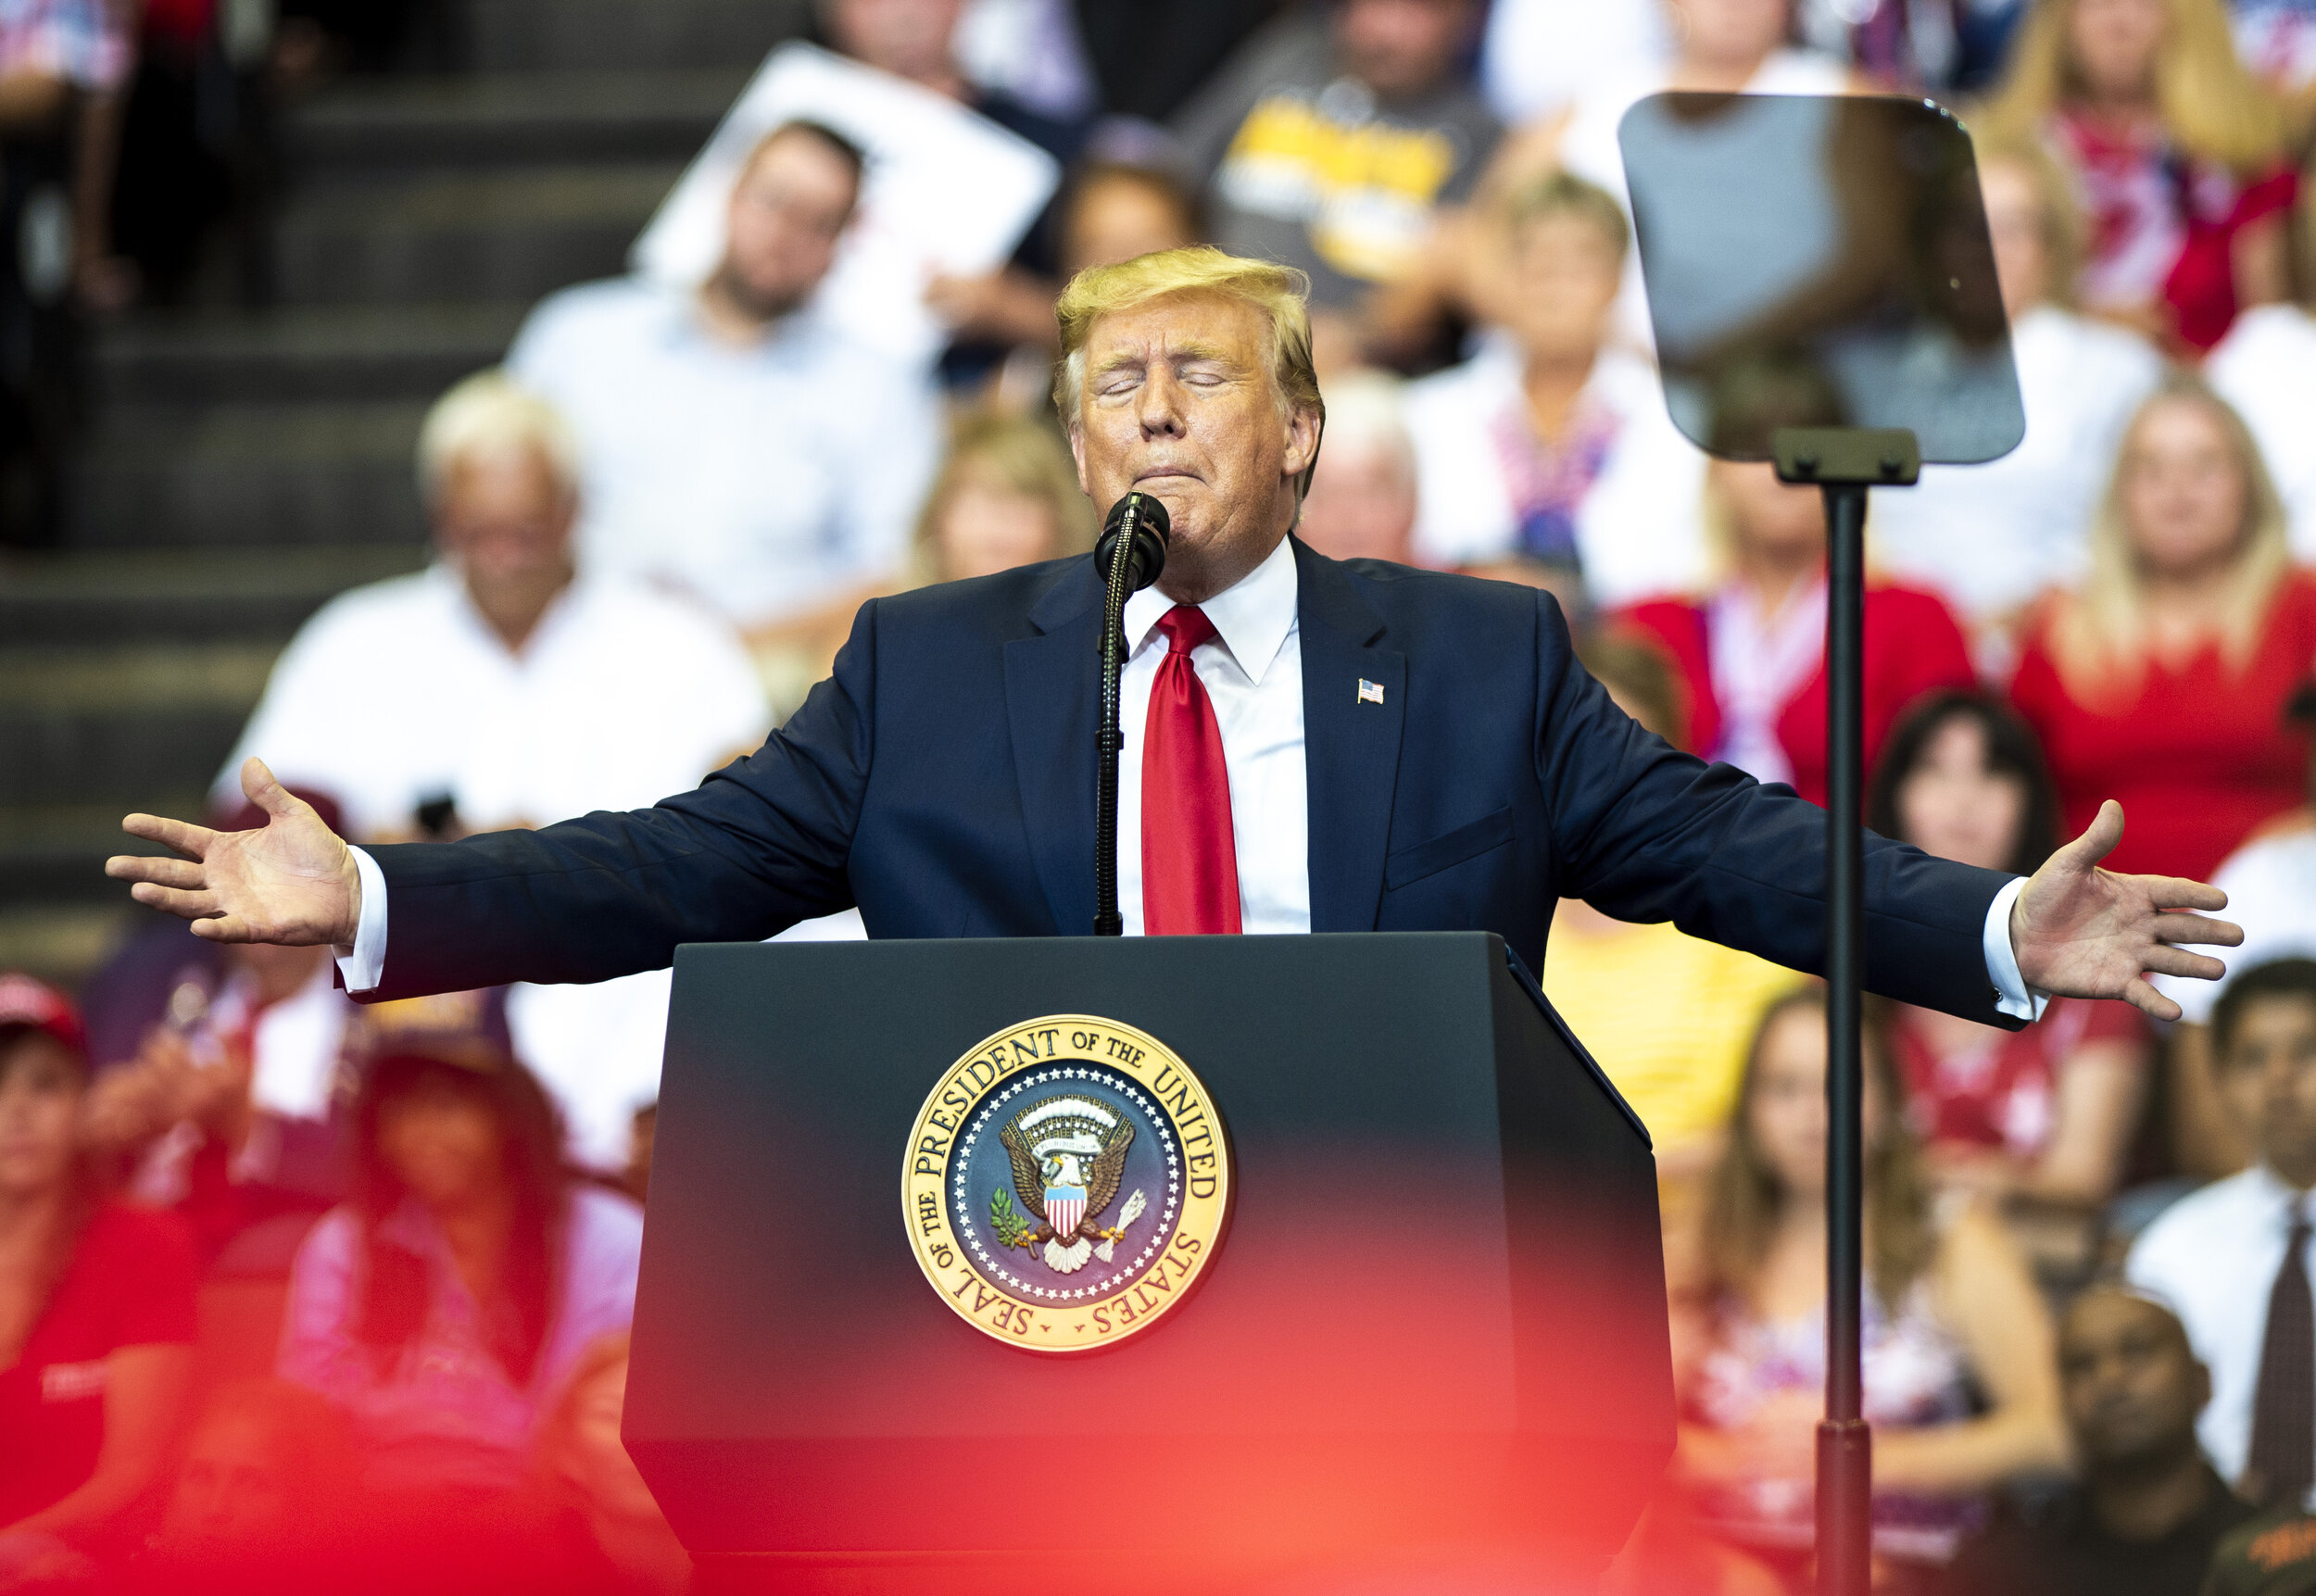  President Donald Trump speaks to his followers during a rally at the US Bank Arena in Cincinnati, Ohio on August 1, 2020. 